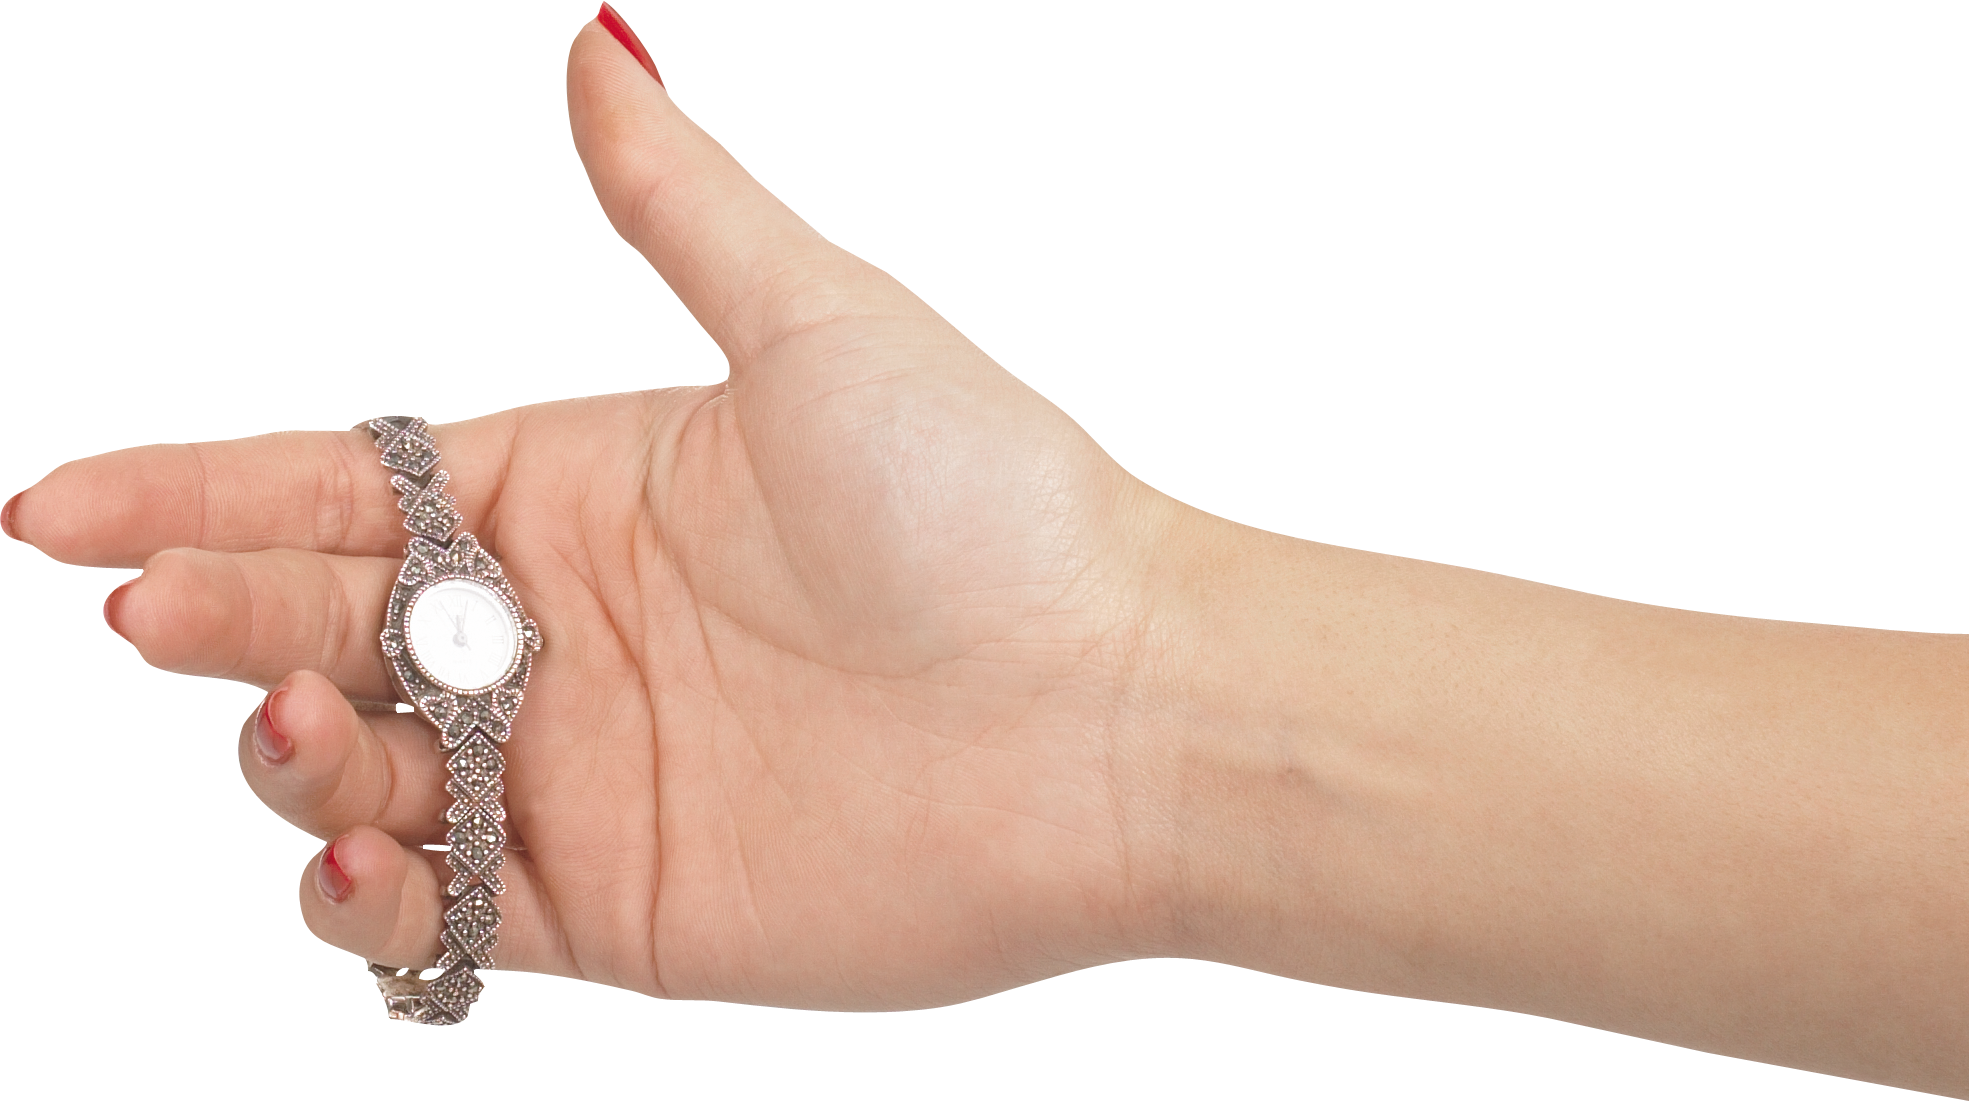 Hands clipart stopwatch. In hand png image